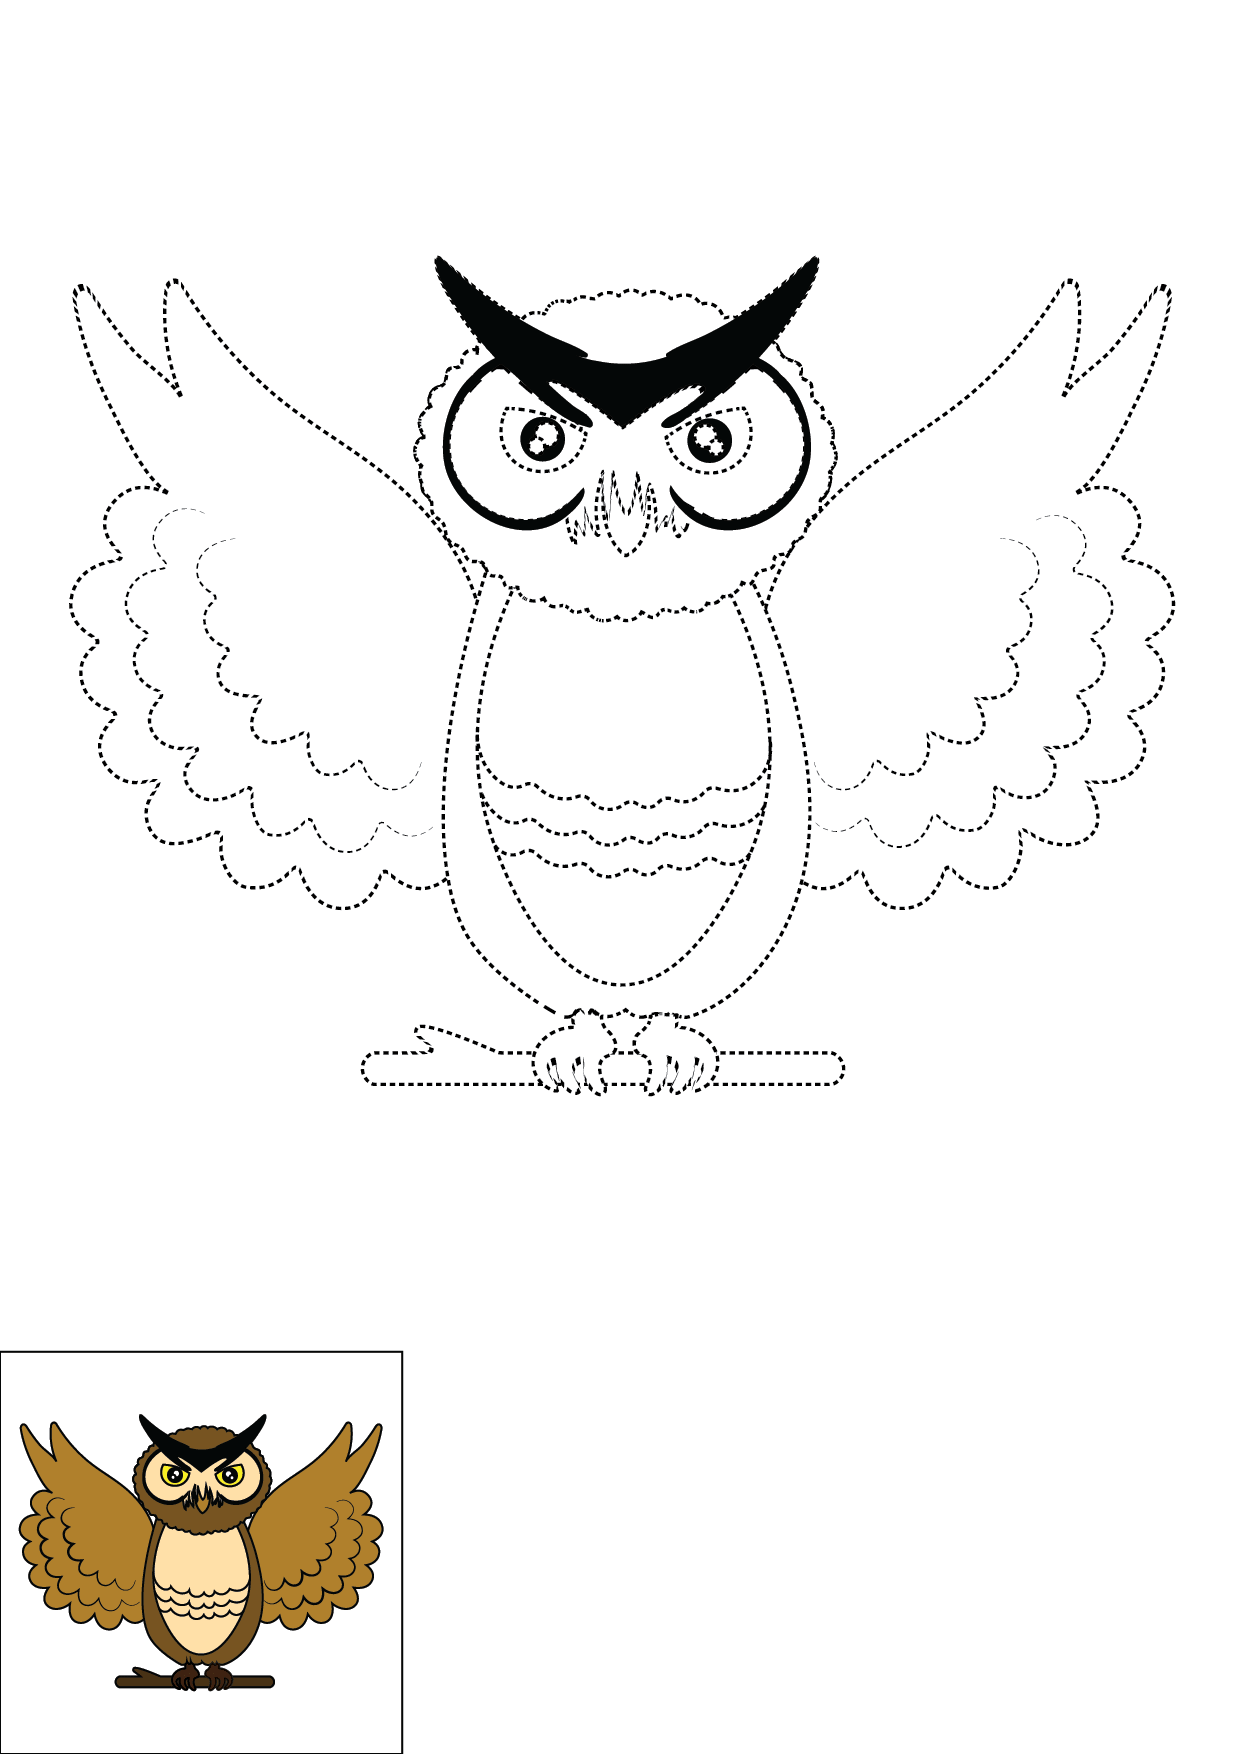 How to Draw An Owl Step by Step Printable Dotted